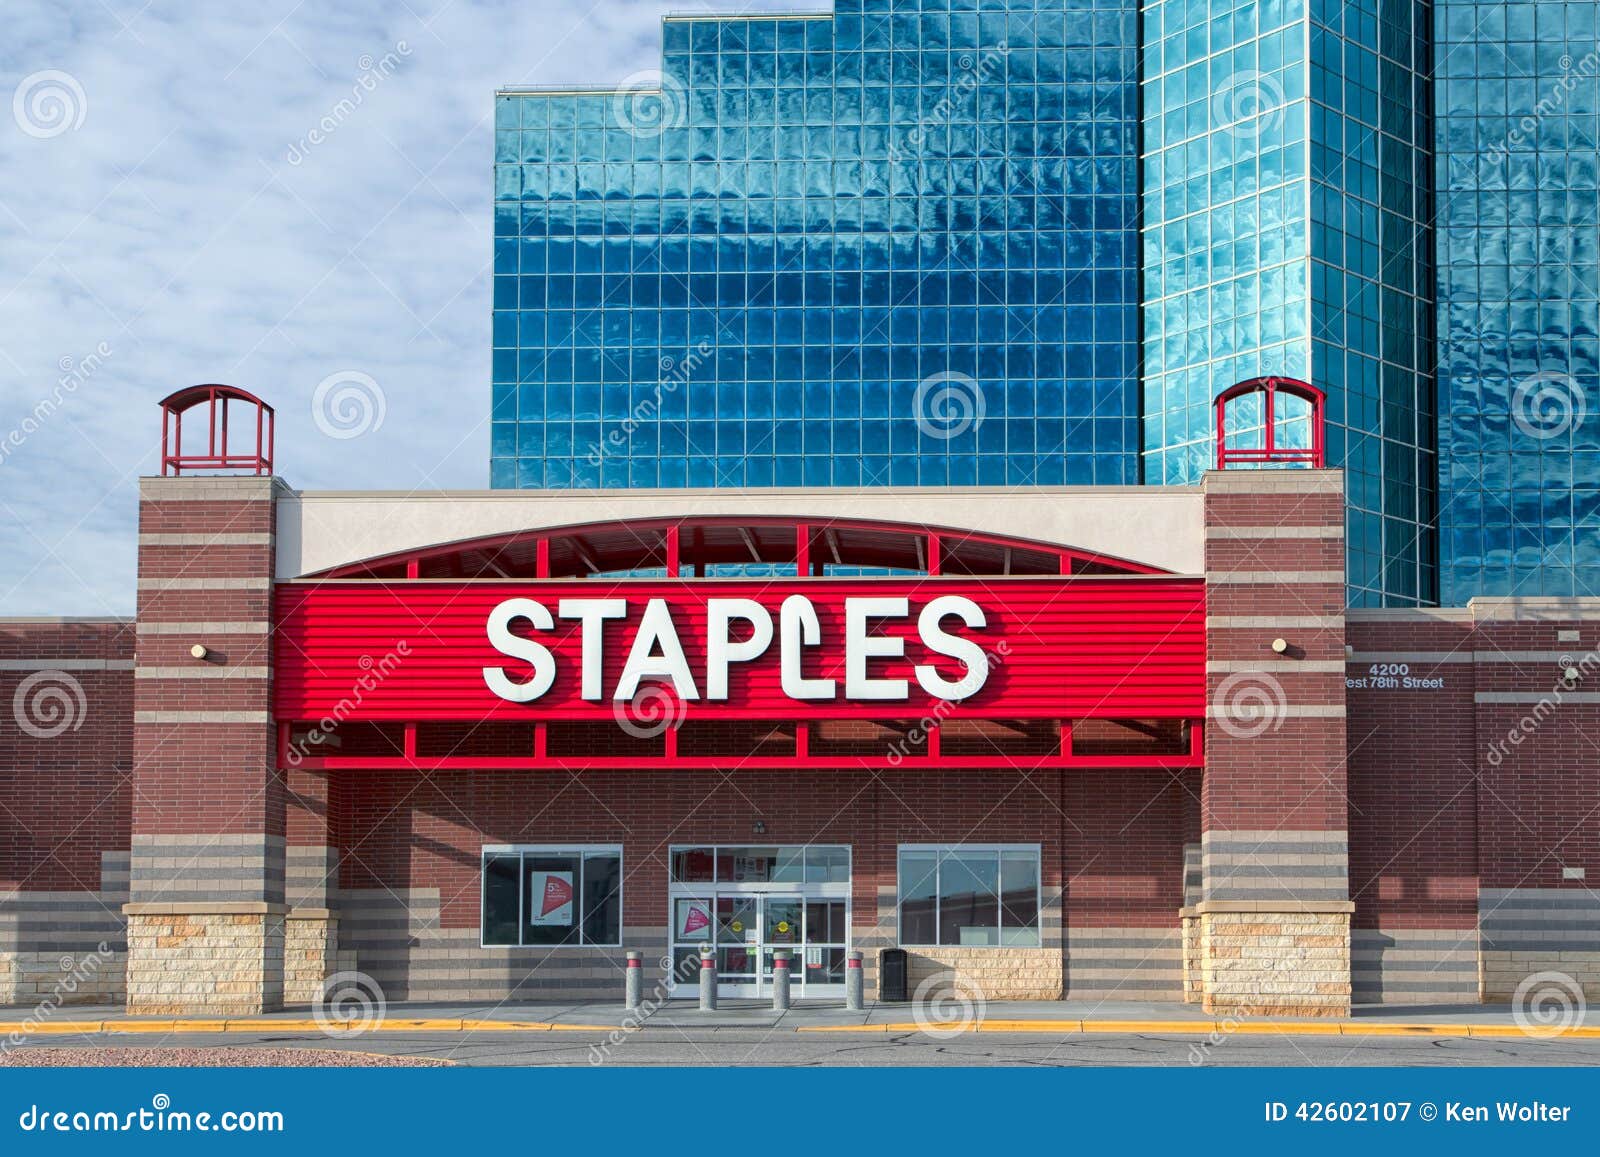 Staples Office Supply Store Bloomington Mn Usa June Exterior Inc Sells Supplies Machines Promotional Products 42602107 